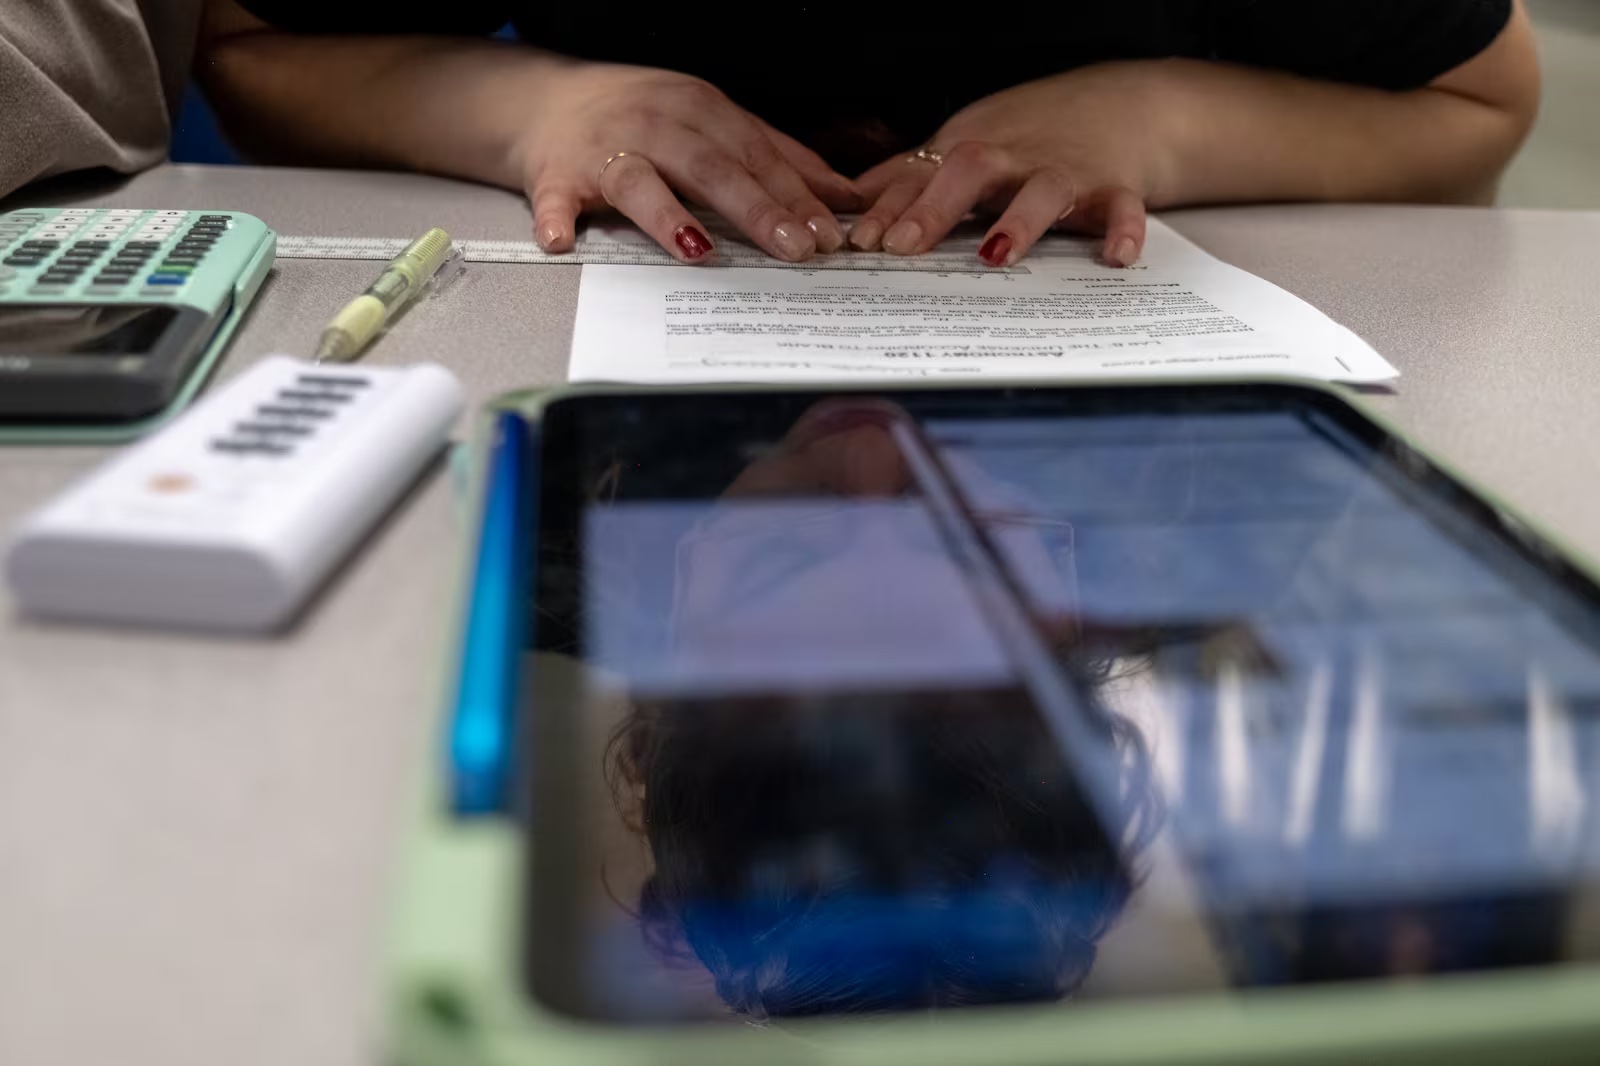 Hands on a table covering a paper. A tablet sits on the table at the foreground.